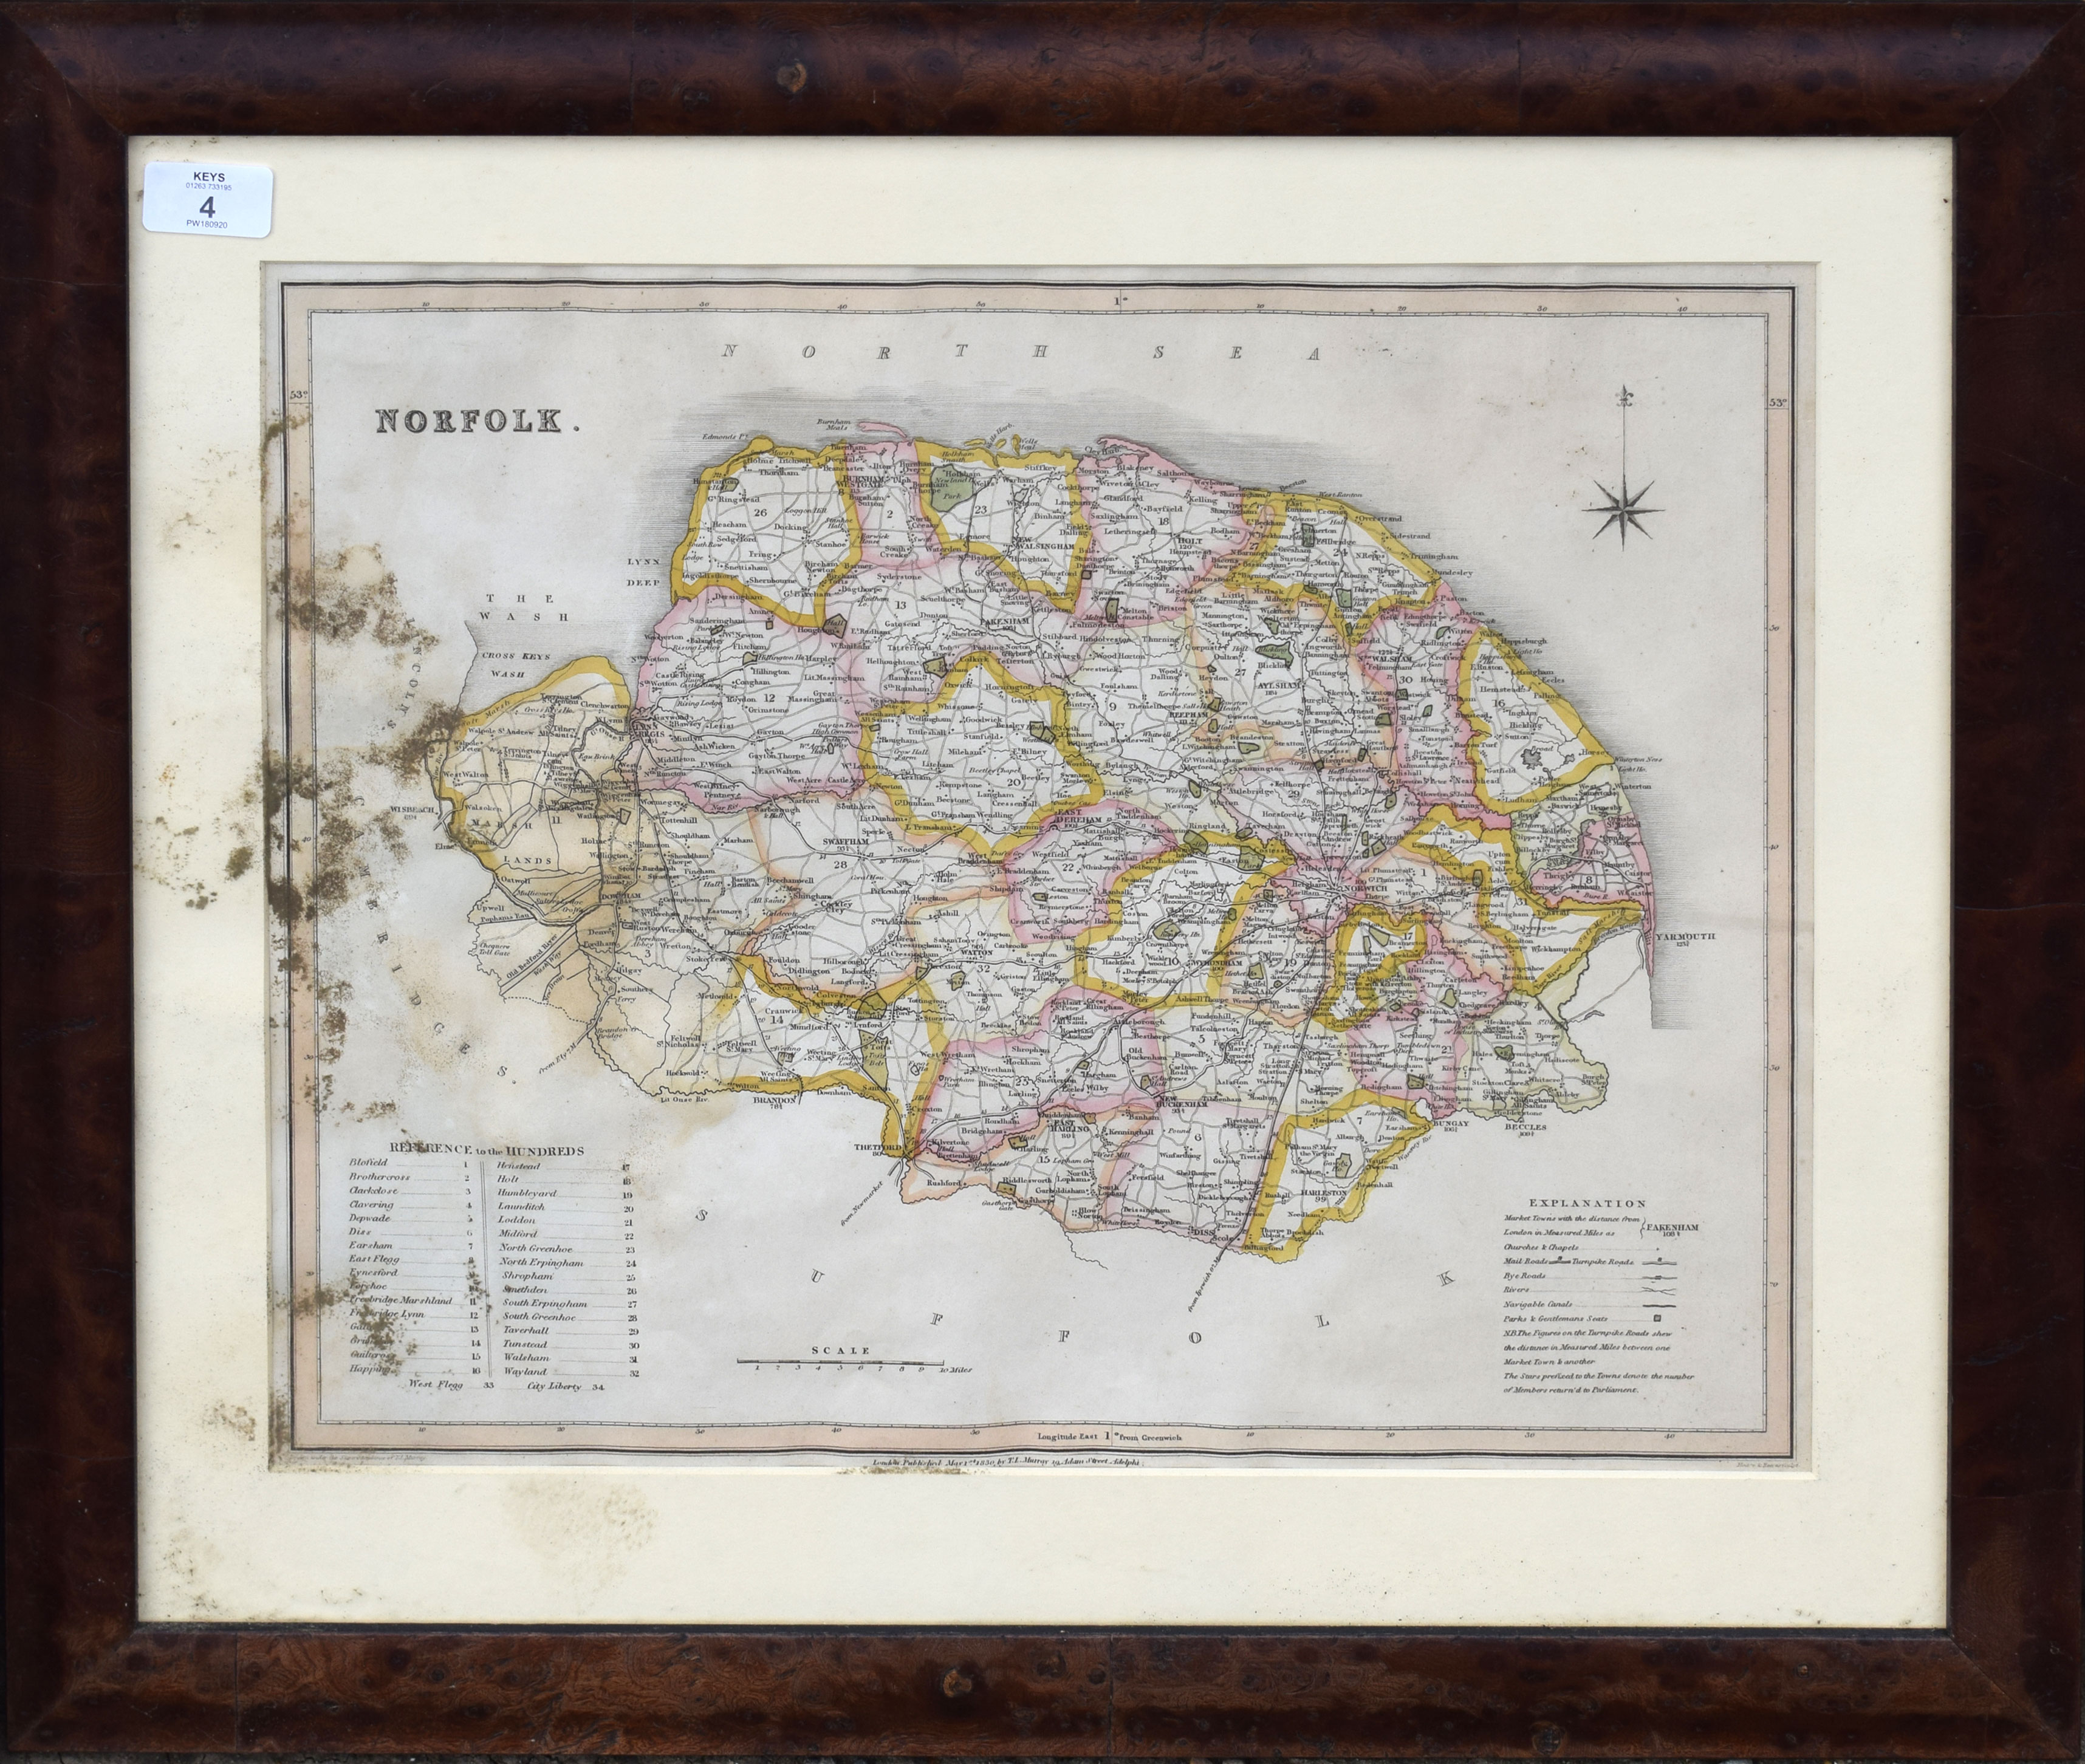 T I Murray, hand coloured engraved map of Norfolk, 35 x 45cm